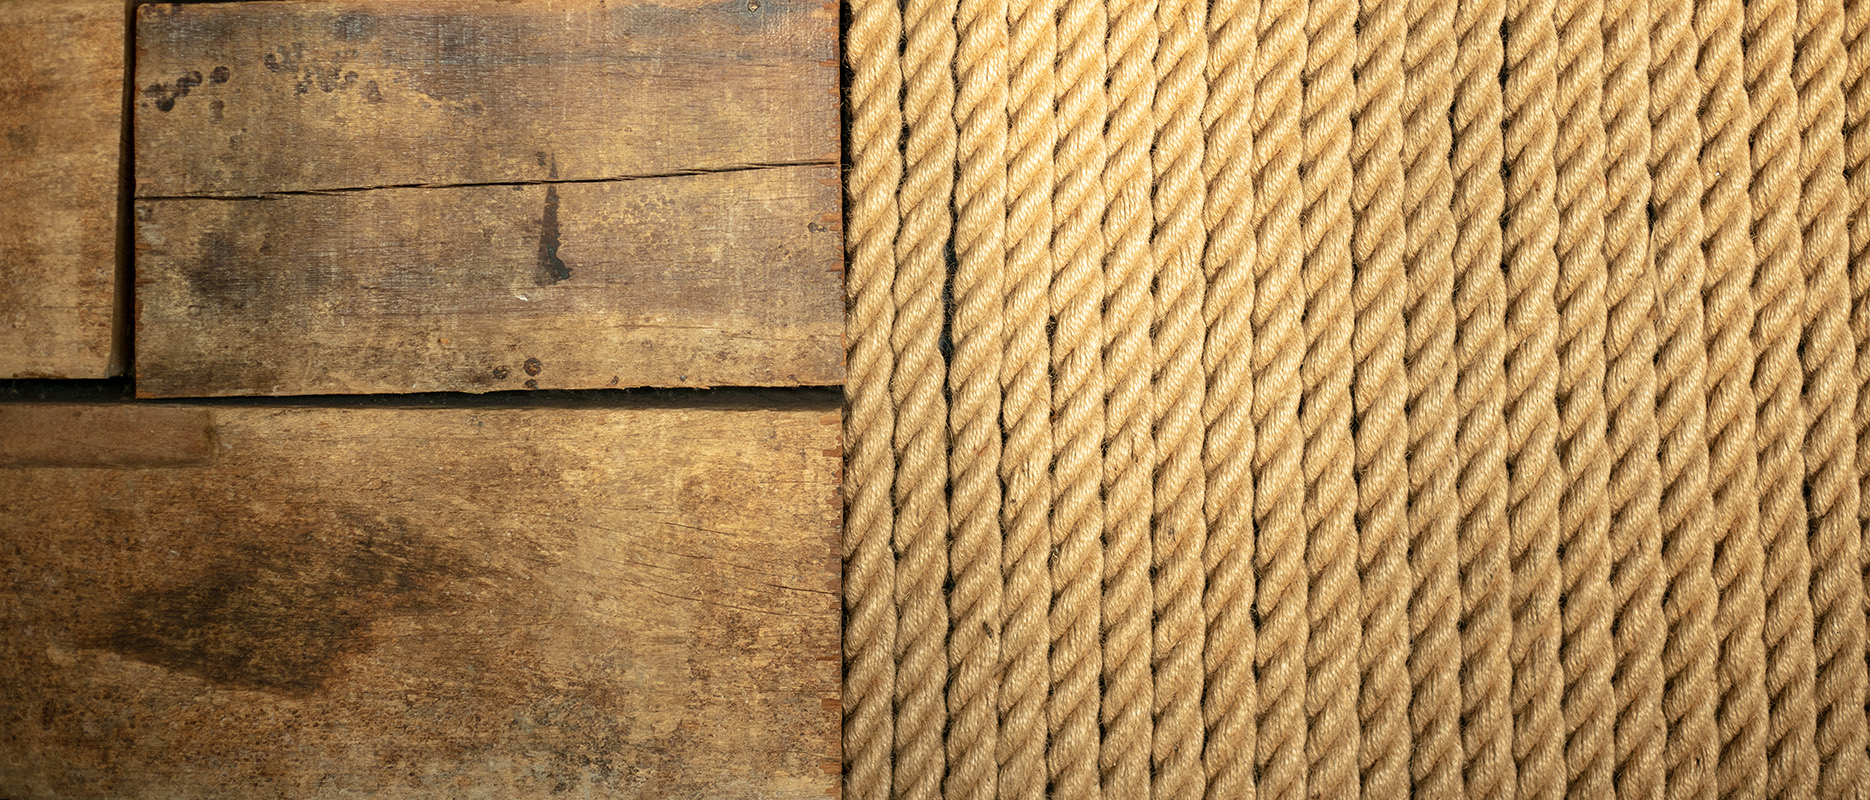 Wood and rope interior elements in Lancing Perch